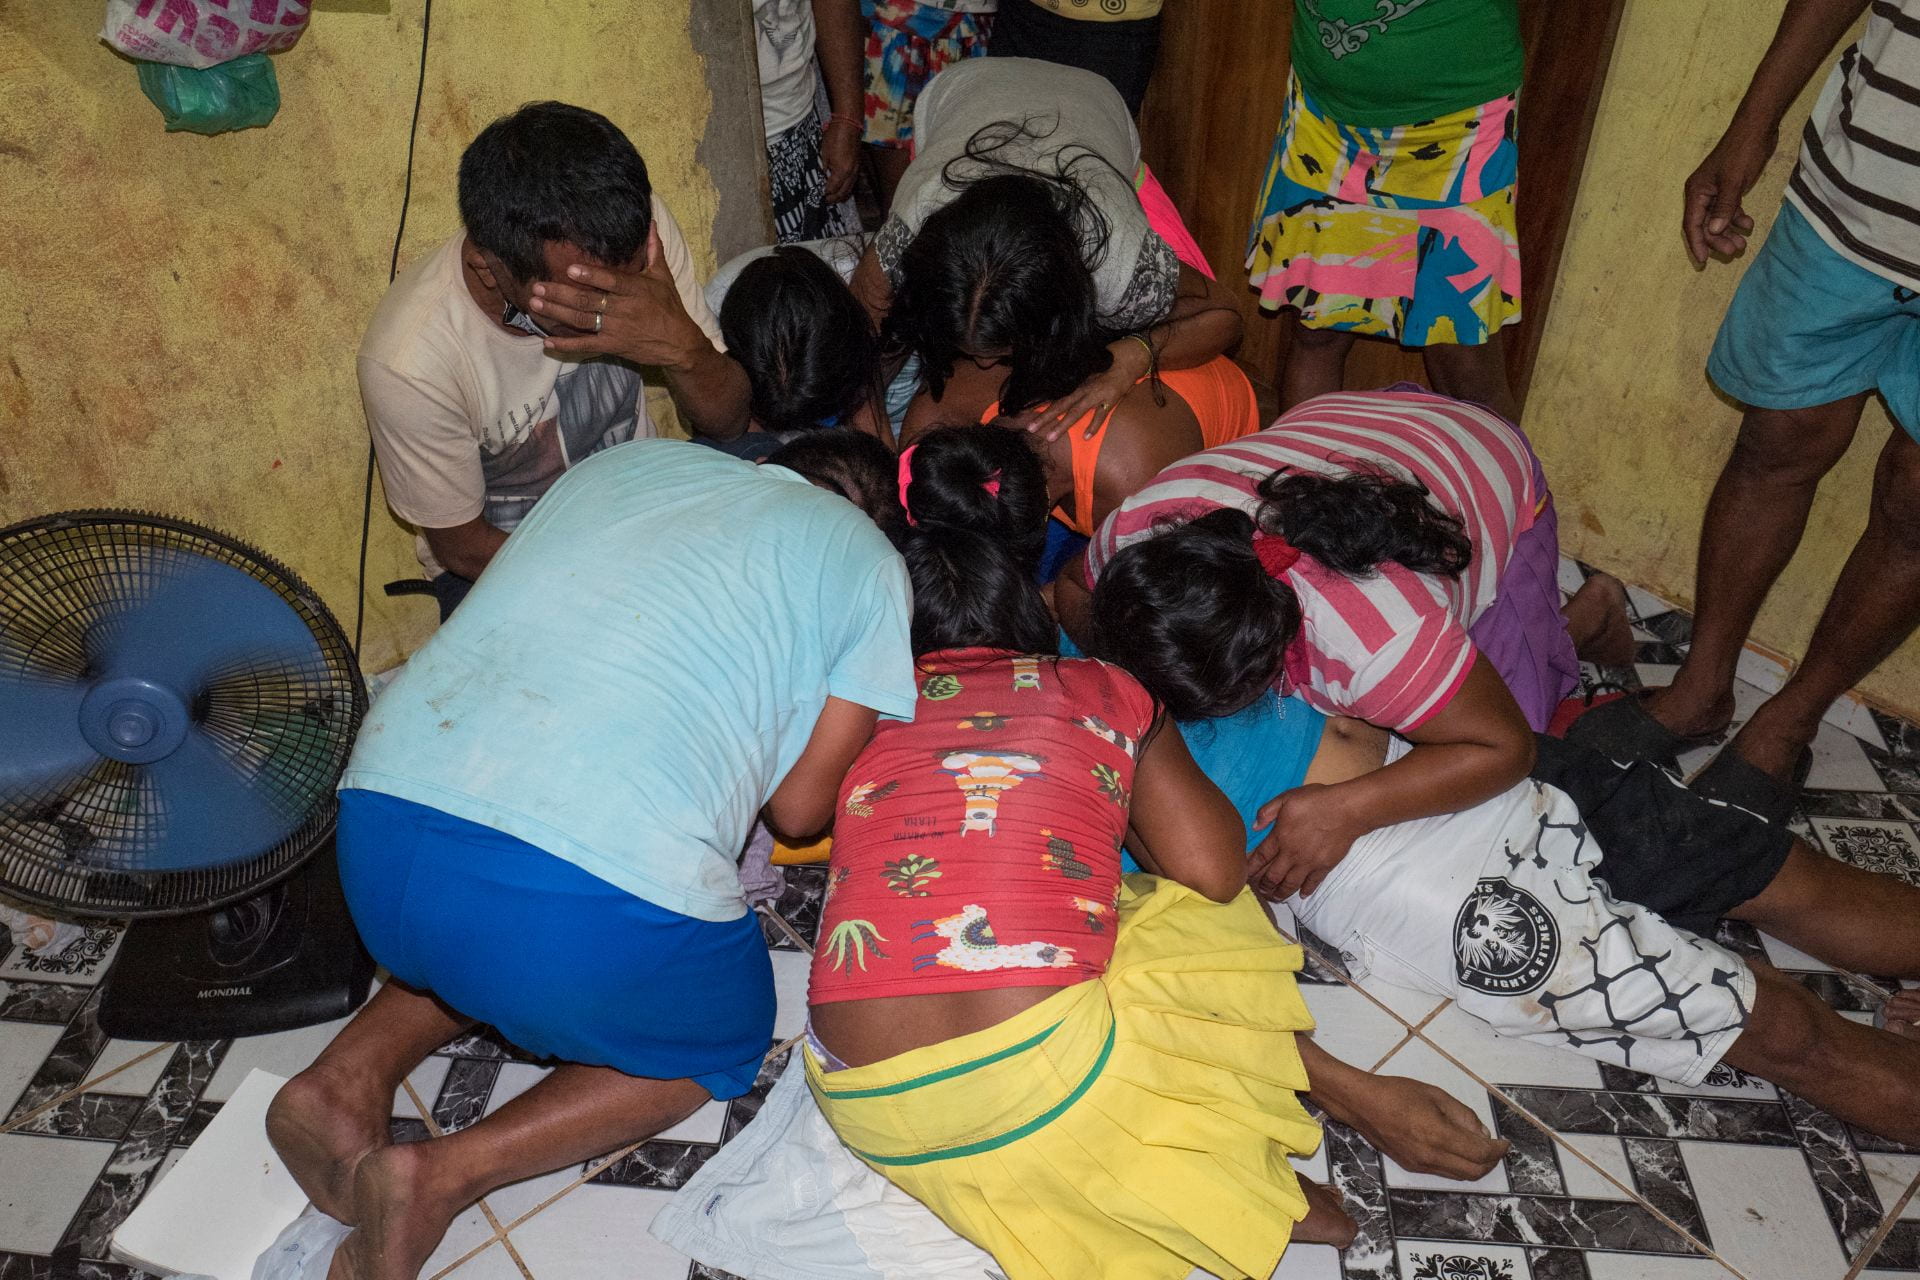 Relatives mourn the death of José Alirio, 45, who died of Covid-19 a few hours ago in a room of a community of about 150 Warao Indigenous refugees in Outeiro, a district of Belem do Pará, Brazilian Amazon. This is the fifht death by COVID19 withing the Warao people of Belém in the past month, including three children. More than xxx indigenous died during the Coronavirus outbreak in Brazil.